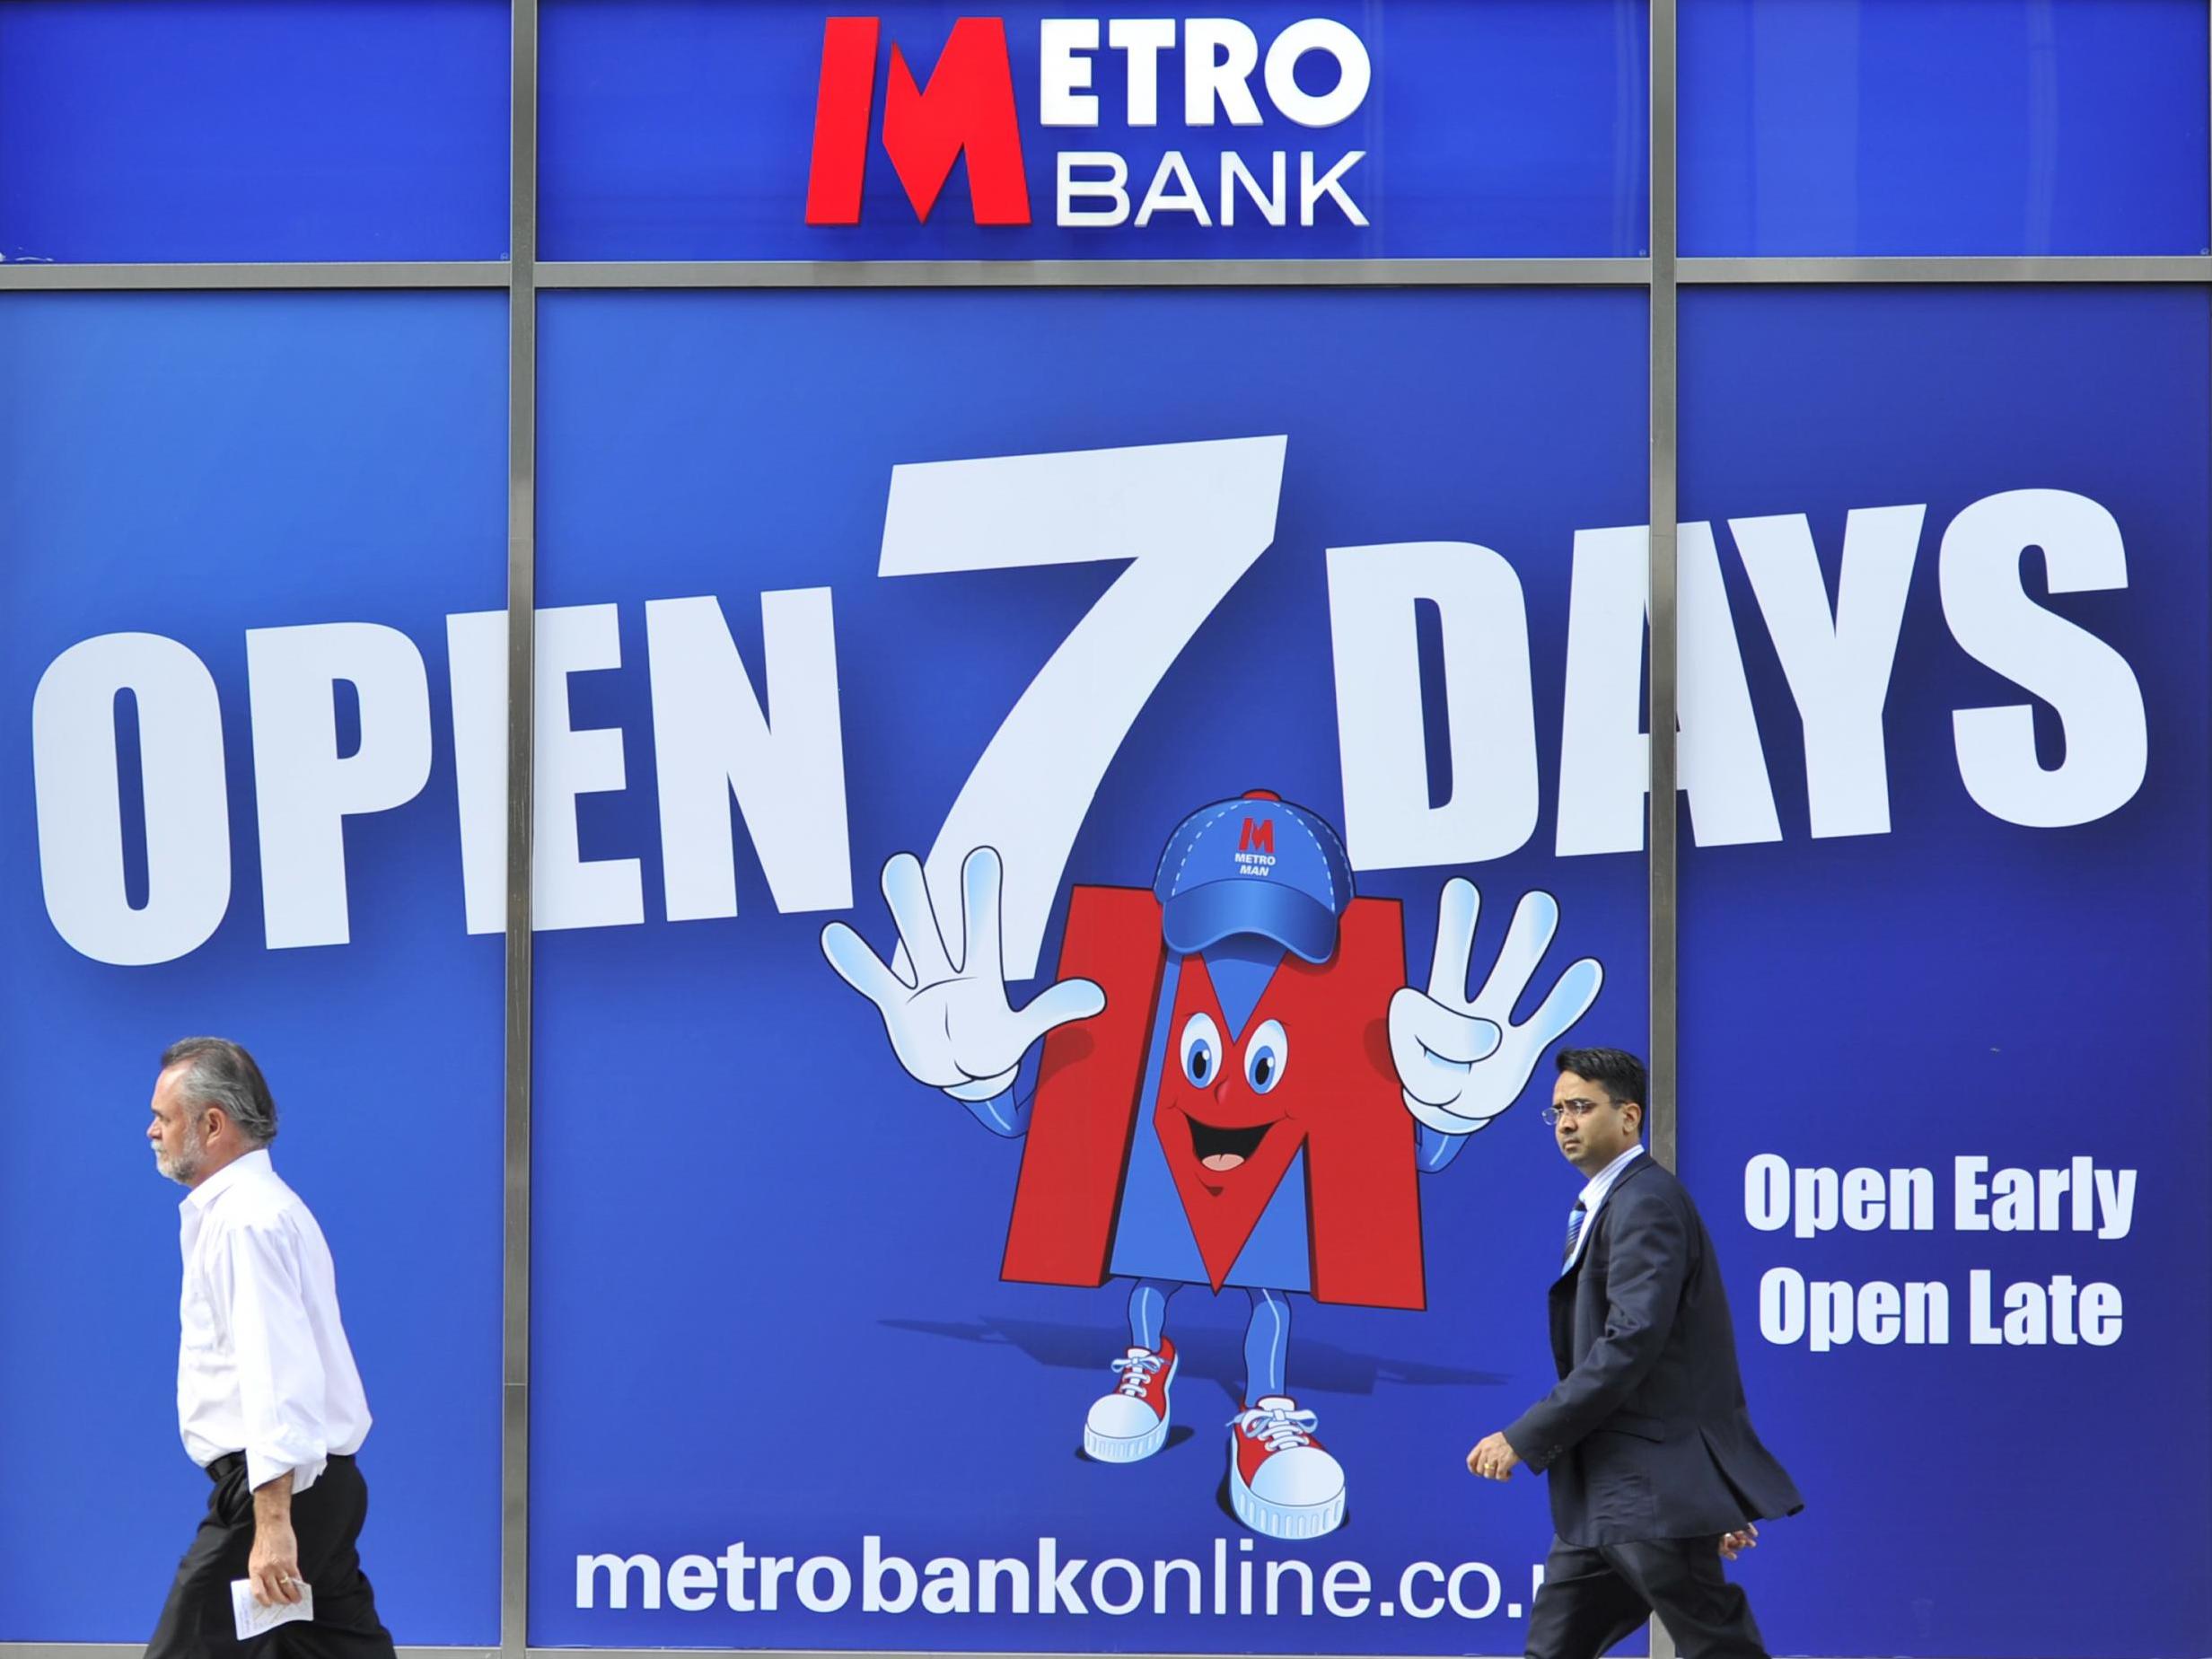 Despite its troubles Metro Bank should keep offering the high street something different